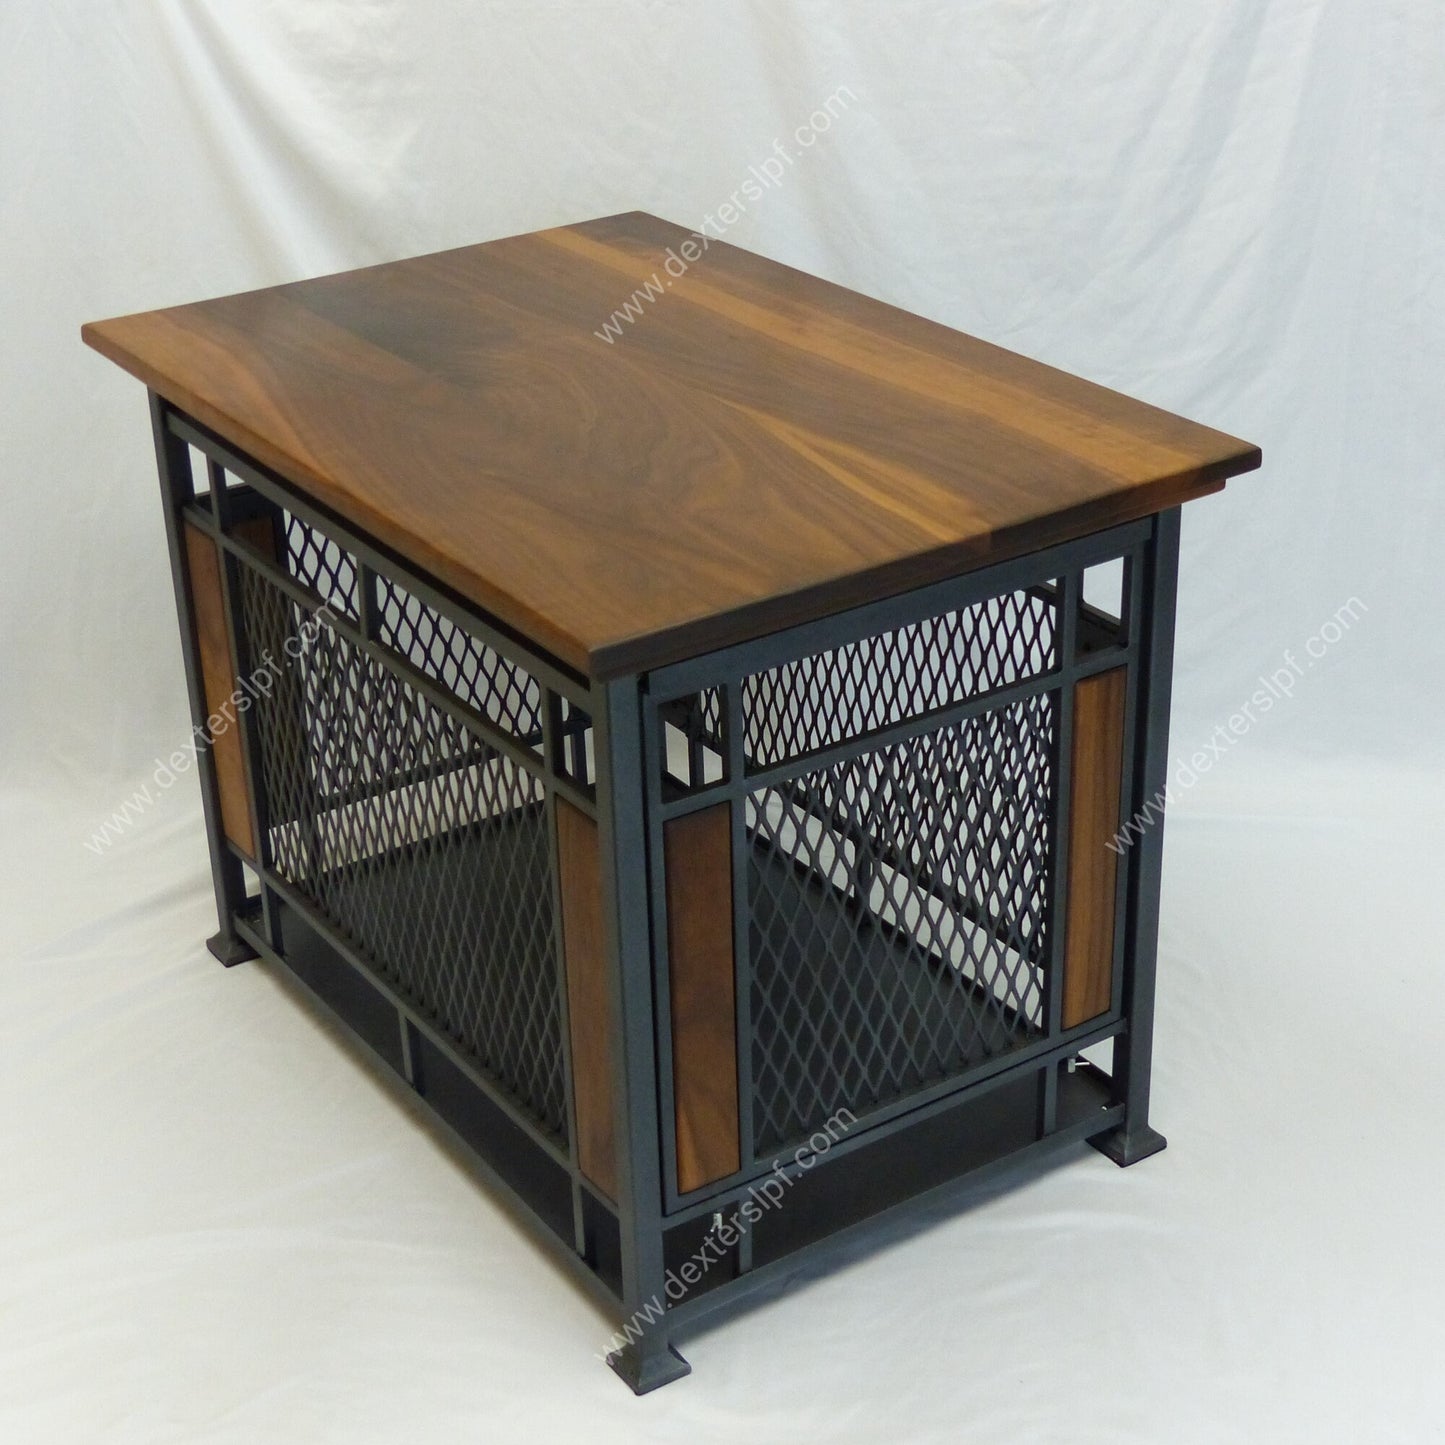 Raven Medium, Dog Crate Table, Modern Dog Crate, Dog Crate Furniture, Dog Kennel Furniture, Dog Crate End Table